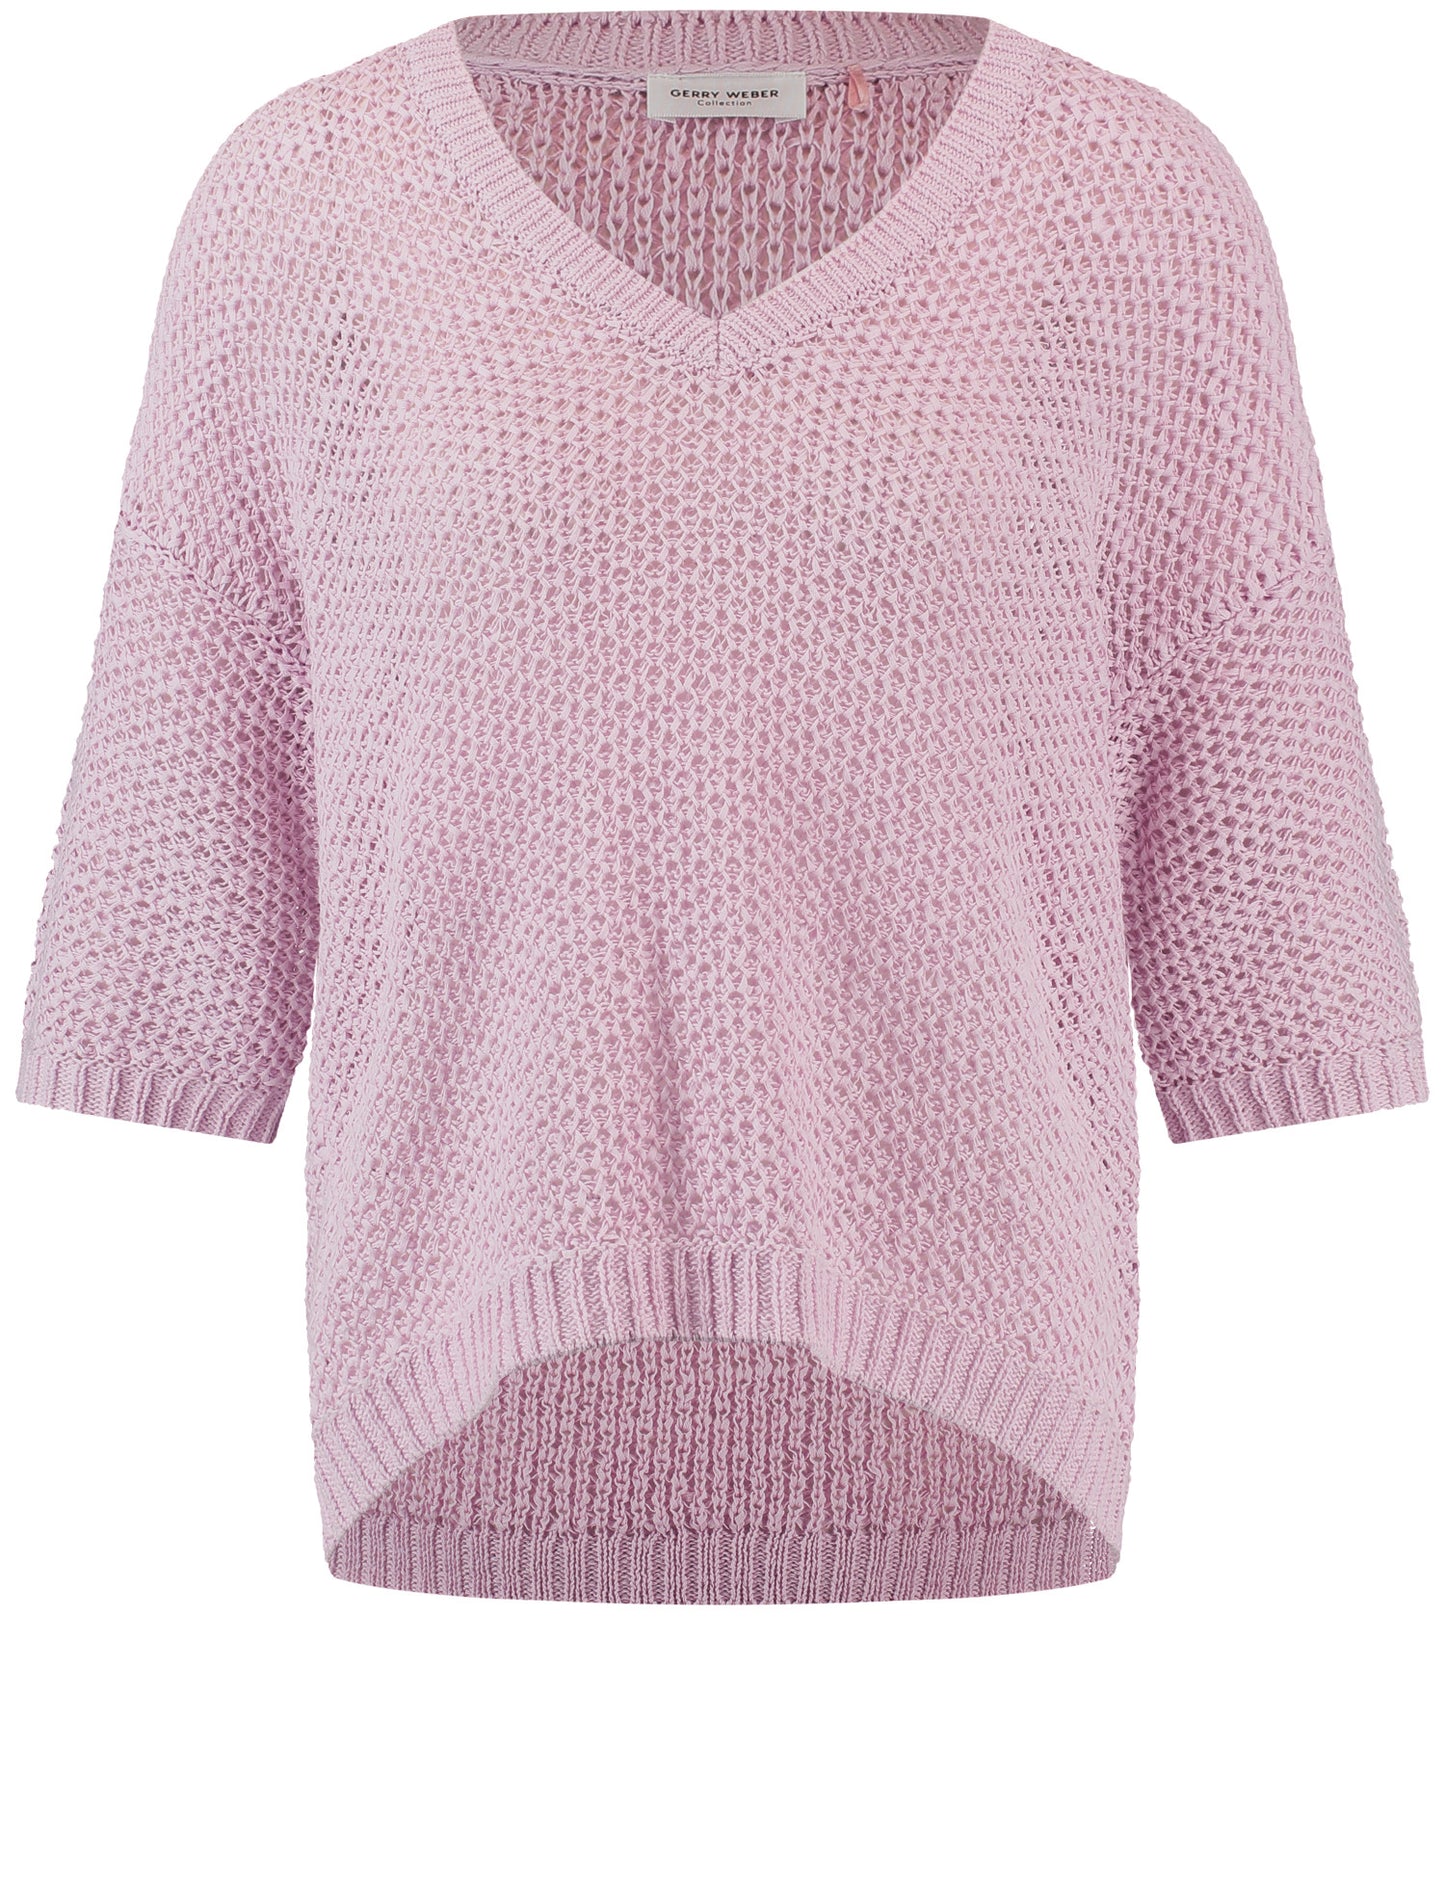 3/4 sleeve sweater with V-neck